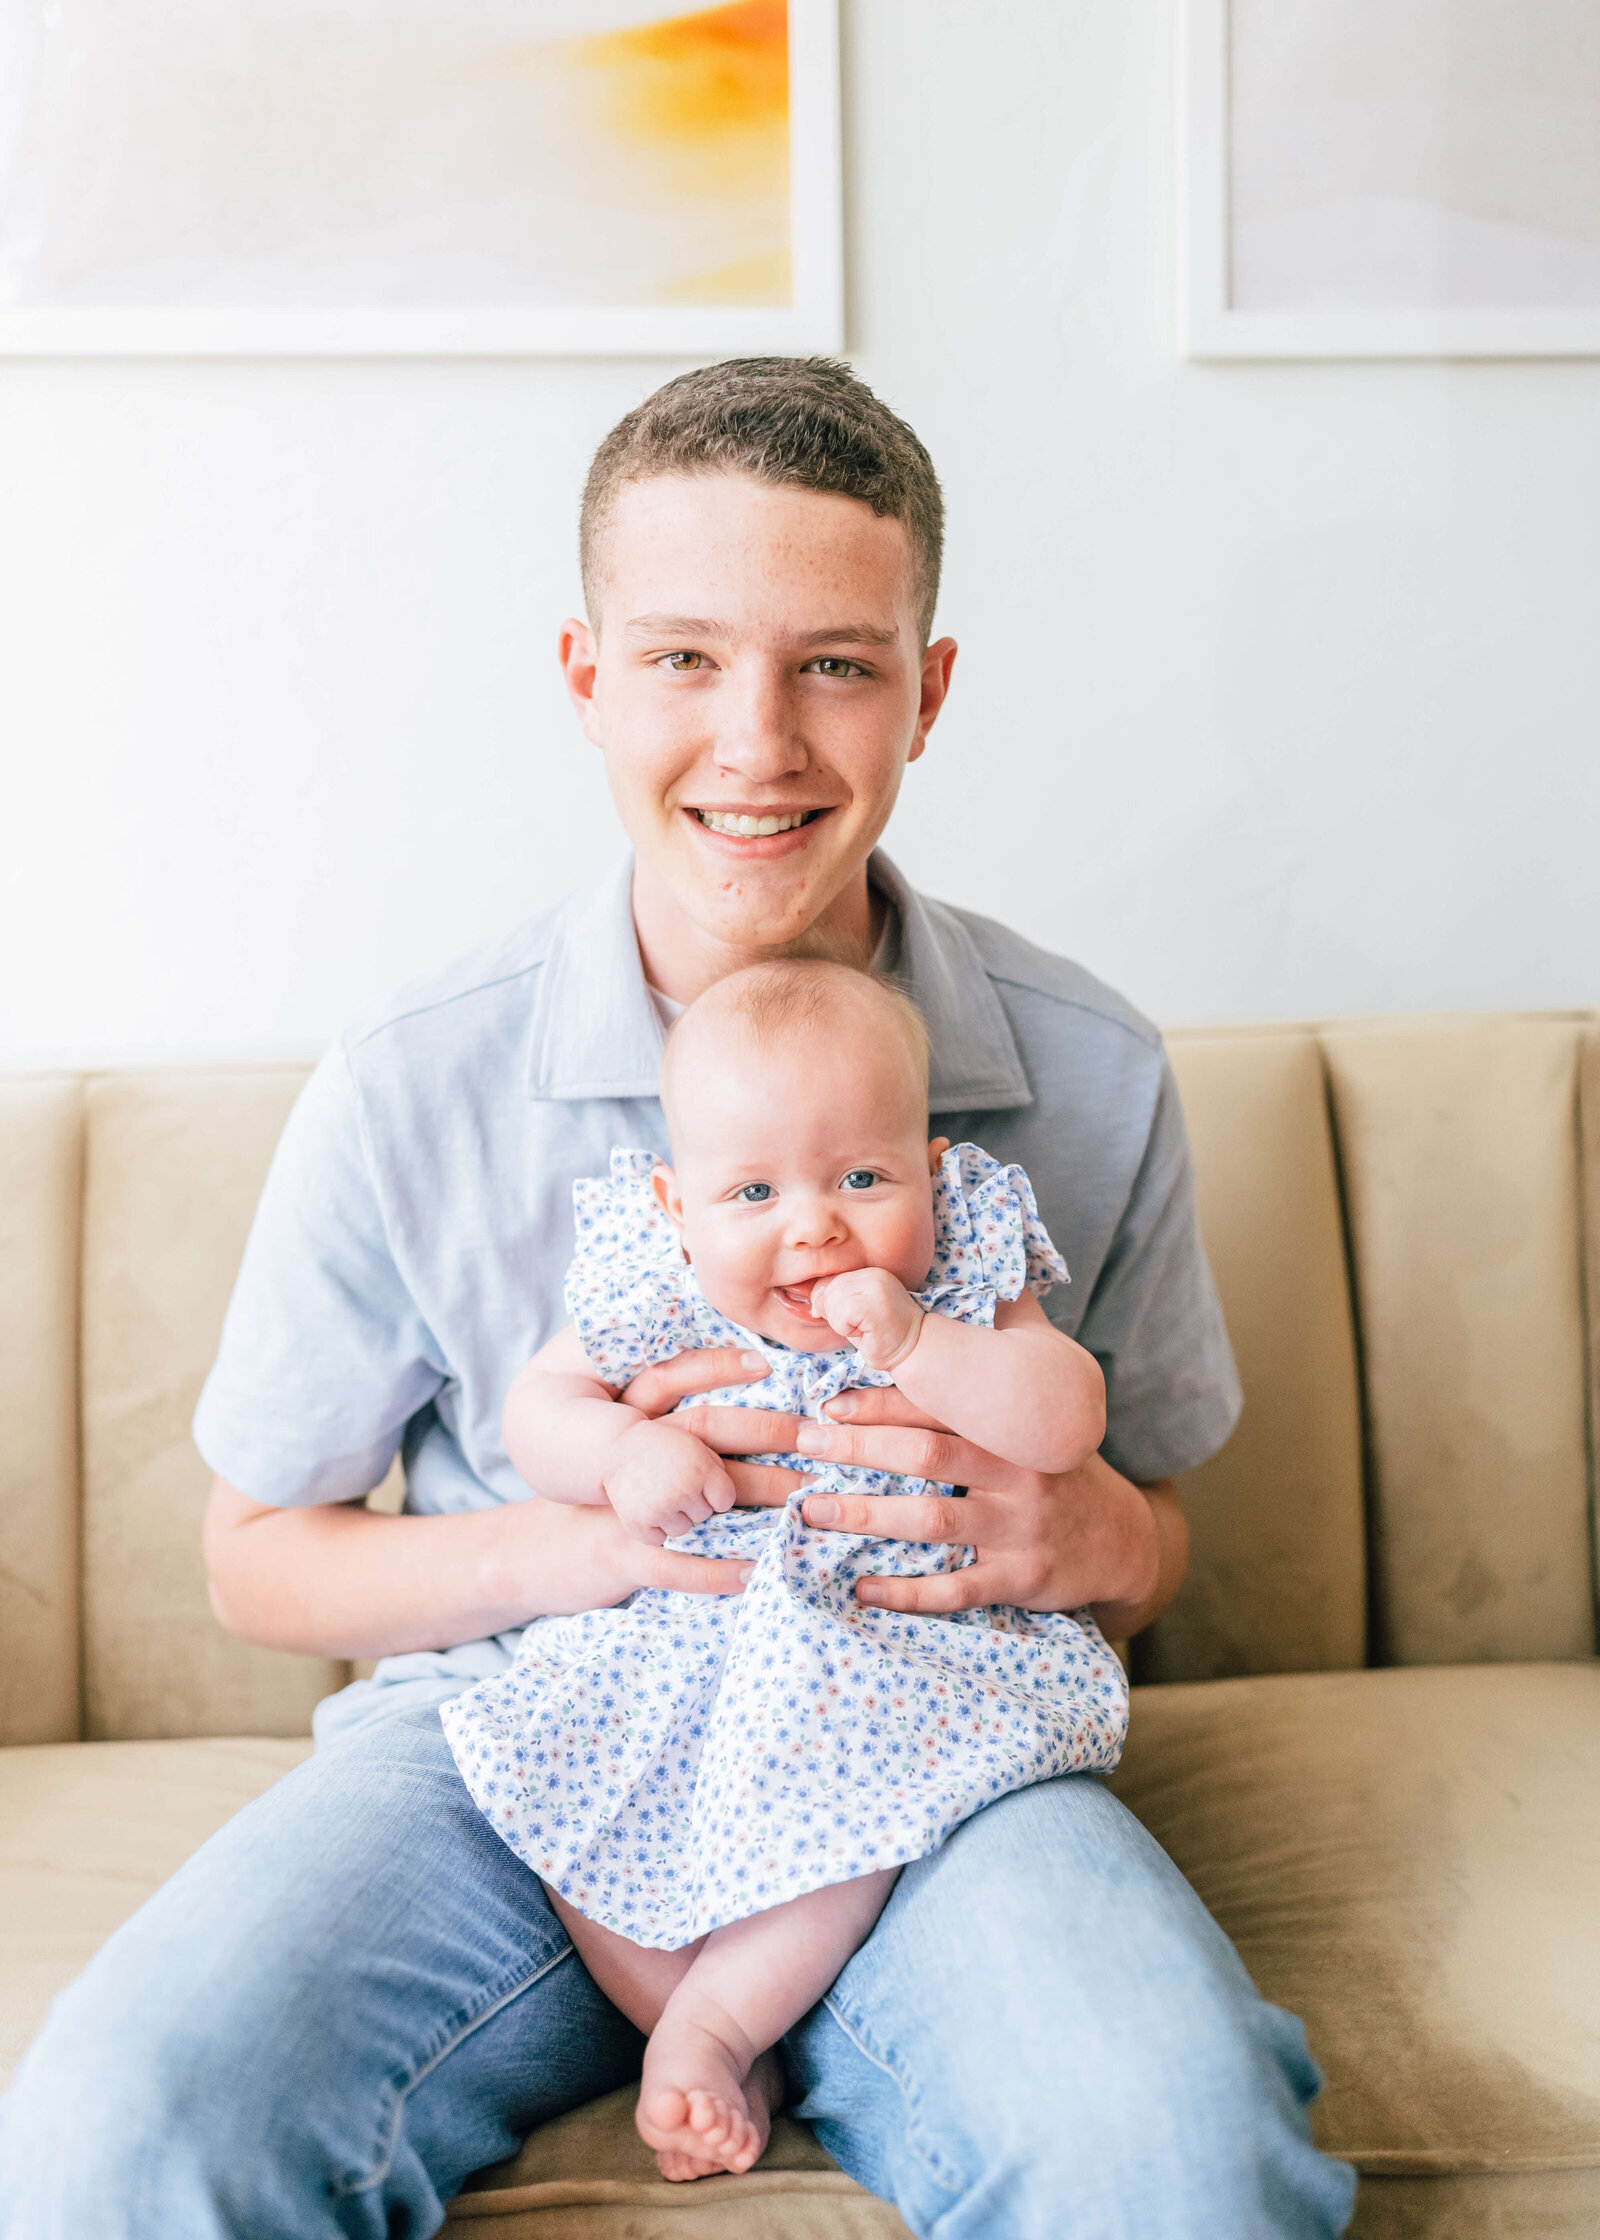 A teenage boy holds his infant sister while they both flash the camera a big smile